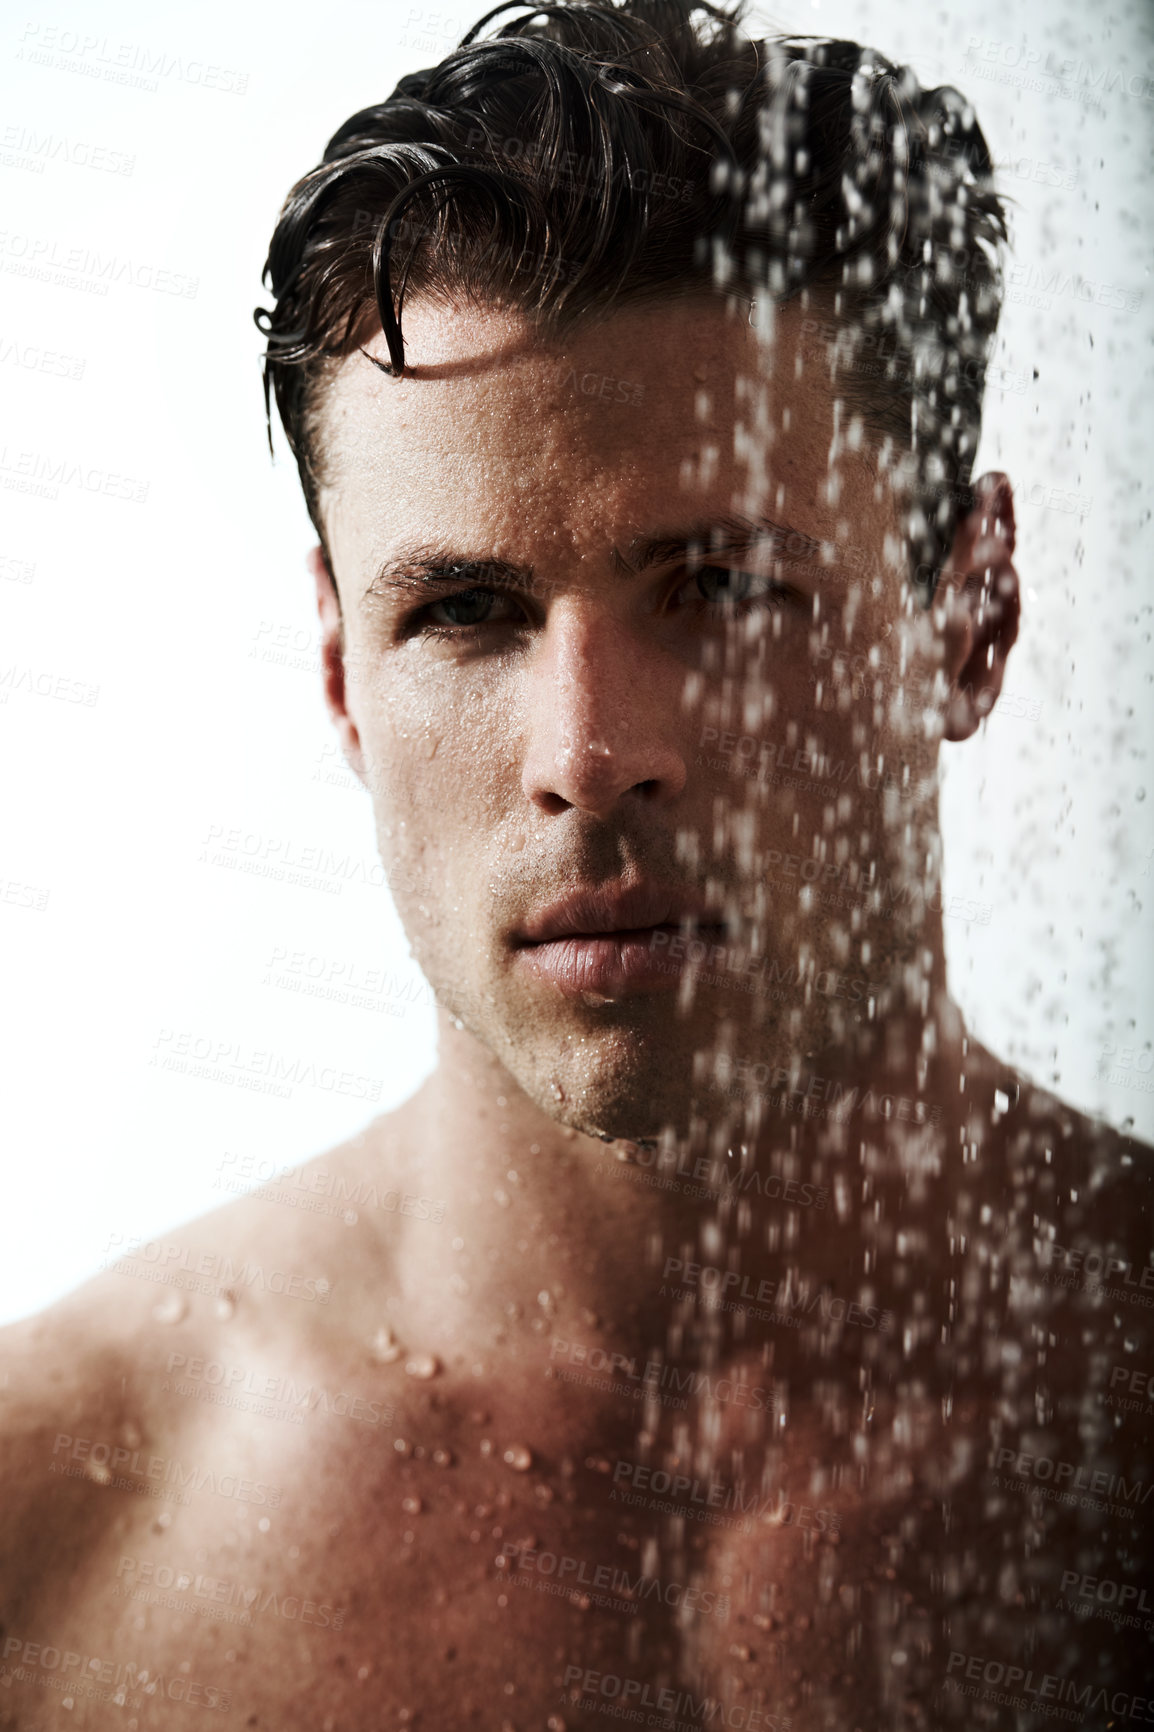 Buy stock photo Serious portrait of man in shower to relax, cleaning hair and body for morning wellness, hygiene and routine. Grooming, skincare and face of male model with muscle in water splash, self care and calm